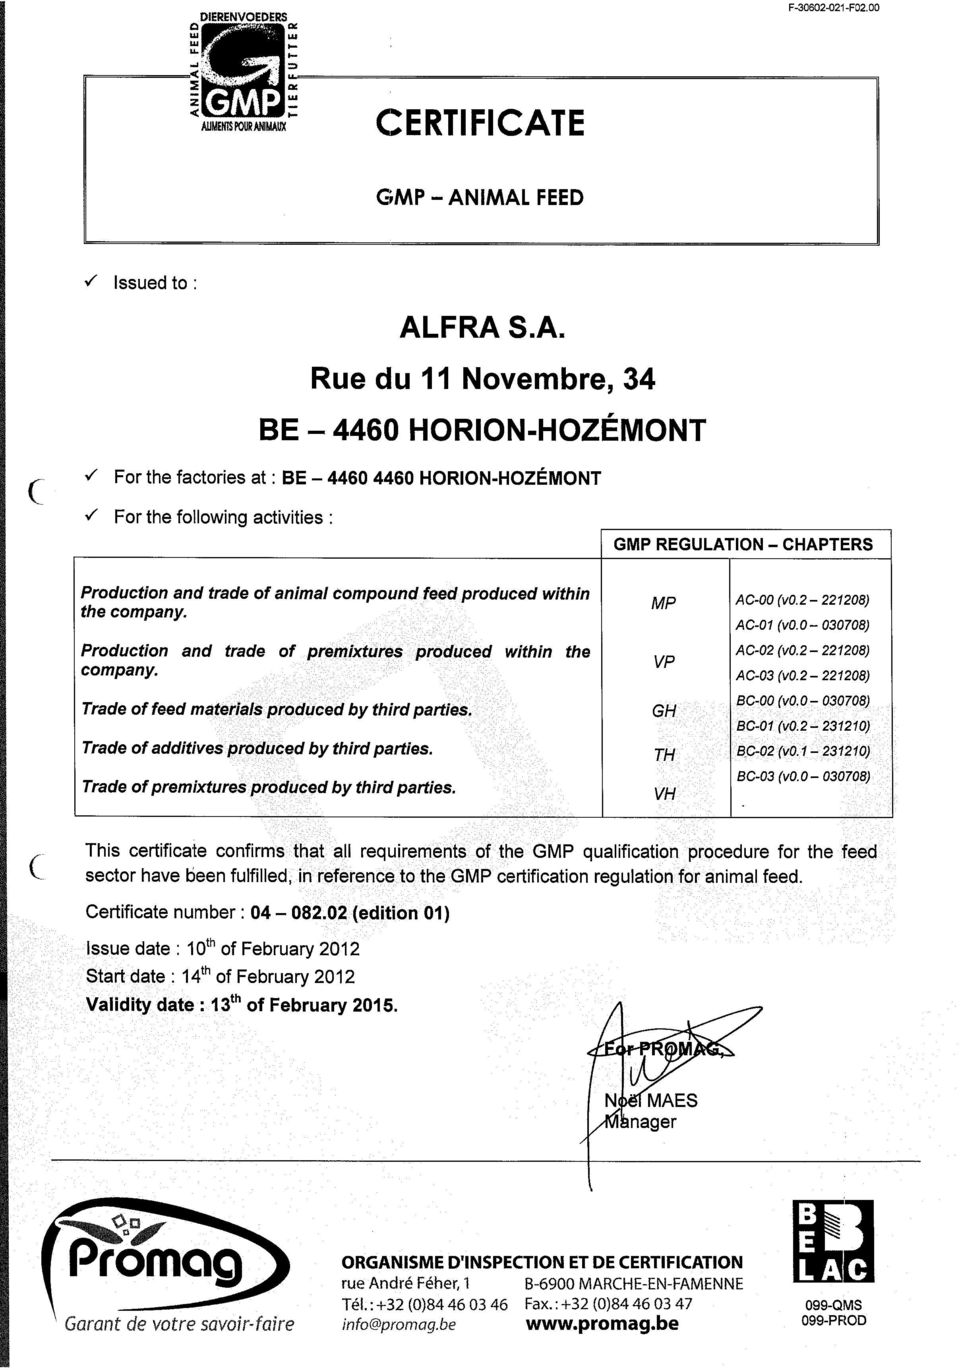 IMAUX CERTIFICATE G - ANIMAL FEED Issued to : ALFRA S.A. BE 4460 HORION-HOZÉMONT,t For the factories at : BE - 4460 4460 HORION-HOZÉMONT ( For the following activities : G REGULATION - CHAPTERS